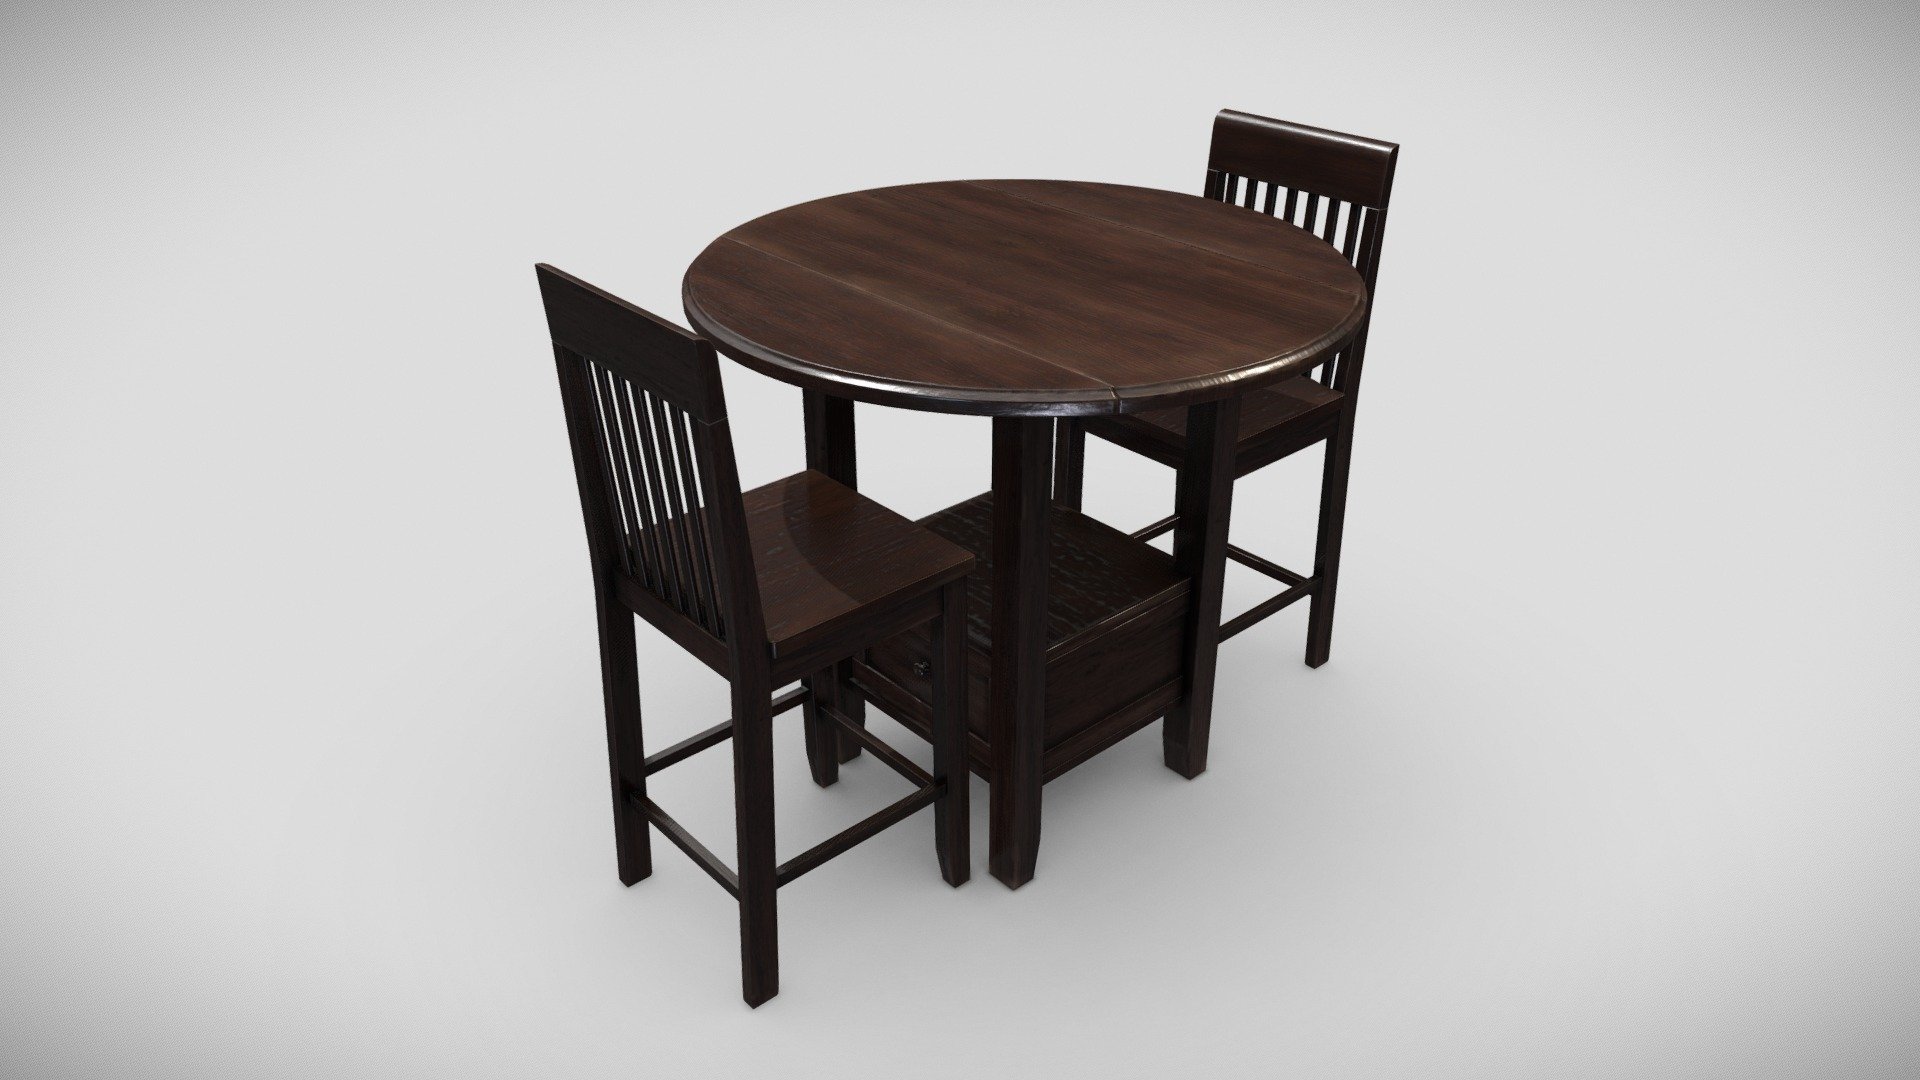 A modern-style pub table with chairs.

Color, Normal, Specular, and AO maps included.

Collada, FBX, and OBJ formats included 3d model